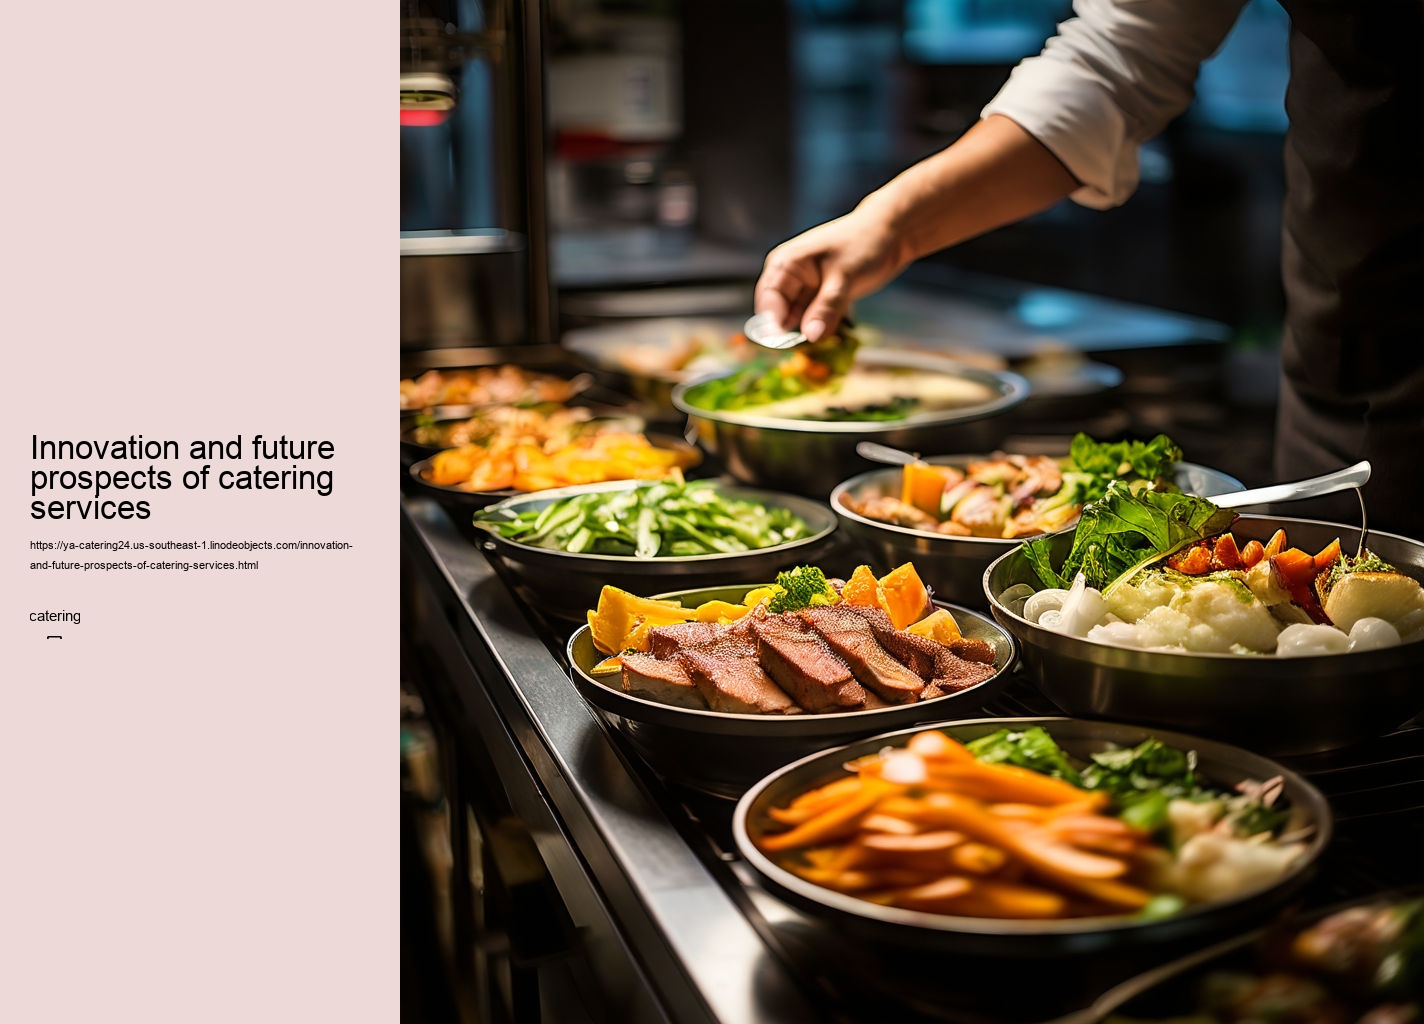 Innovation and future prospects of catering services